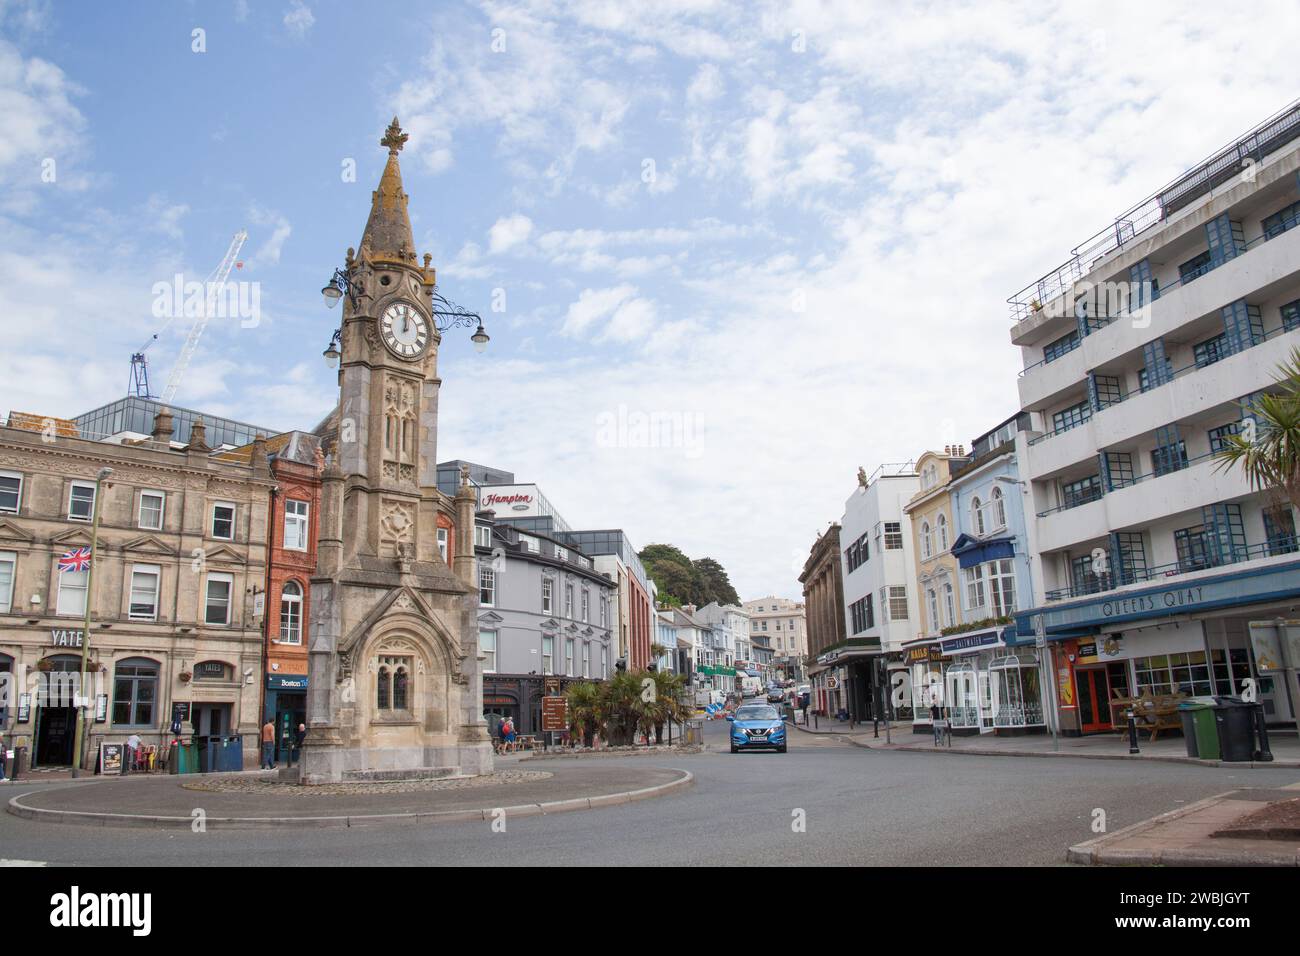 An old clock tower building on a roundabout in Torquay in the United Kingdom Stock Photo